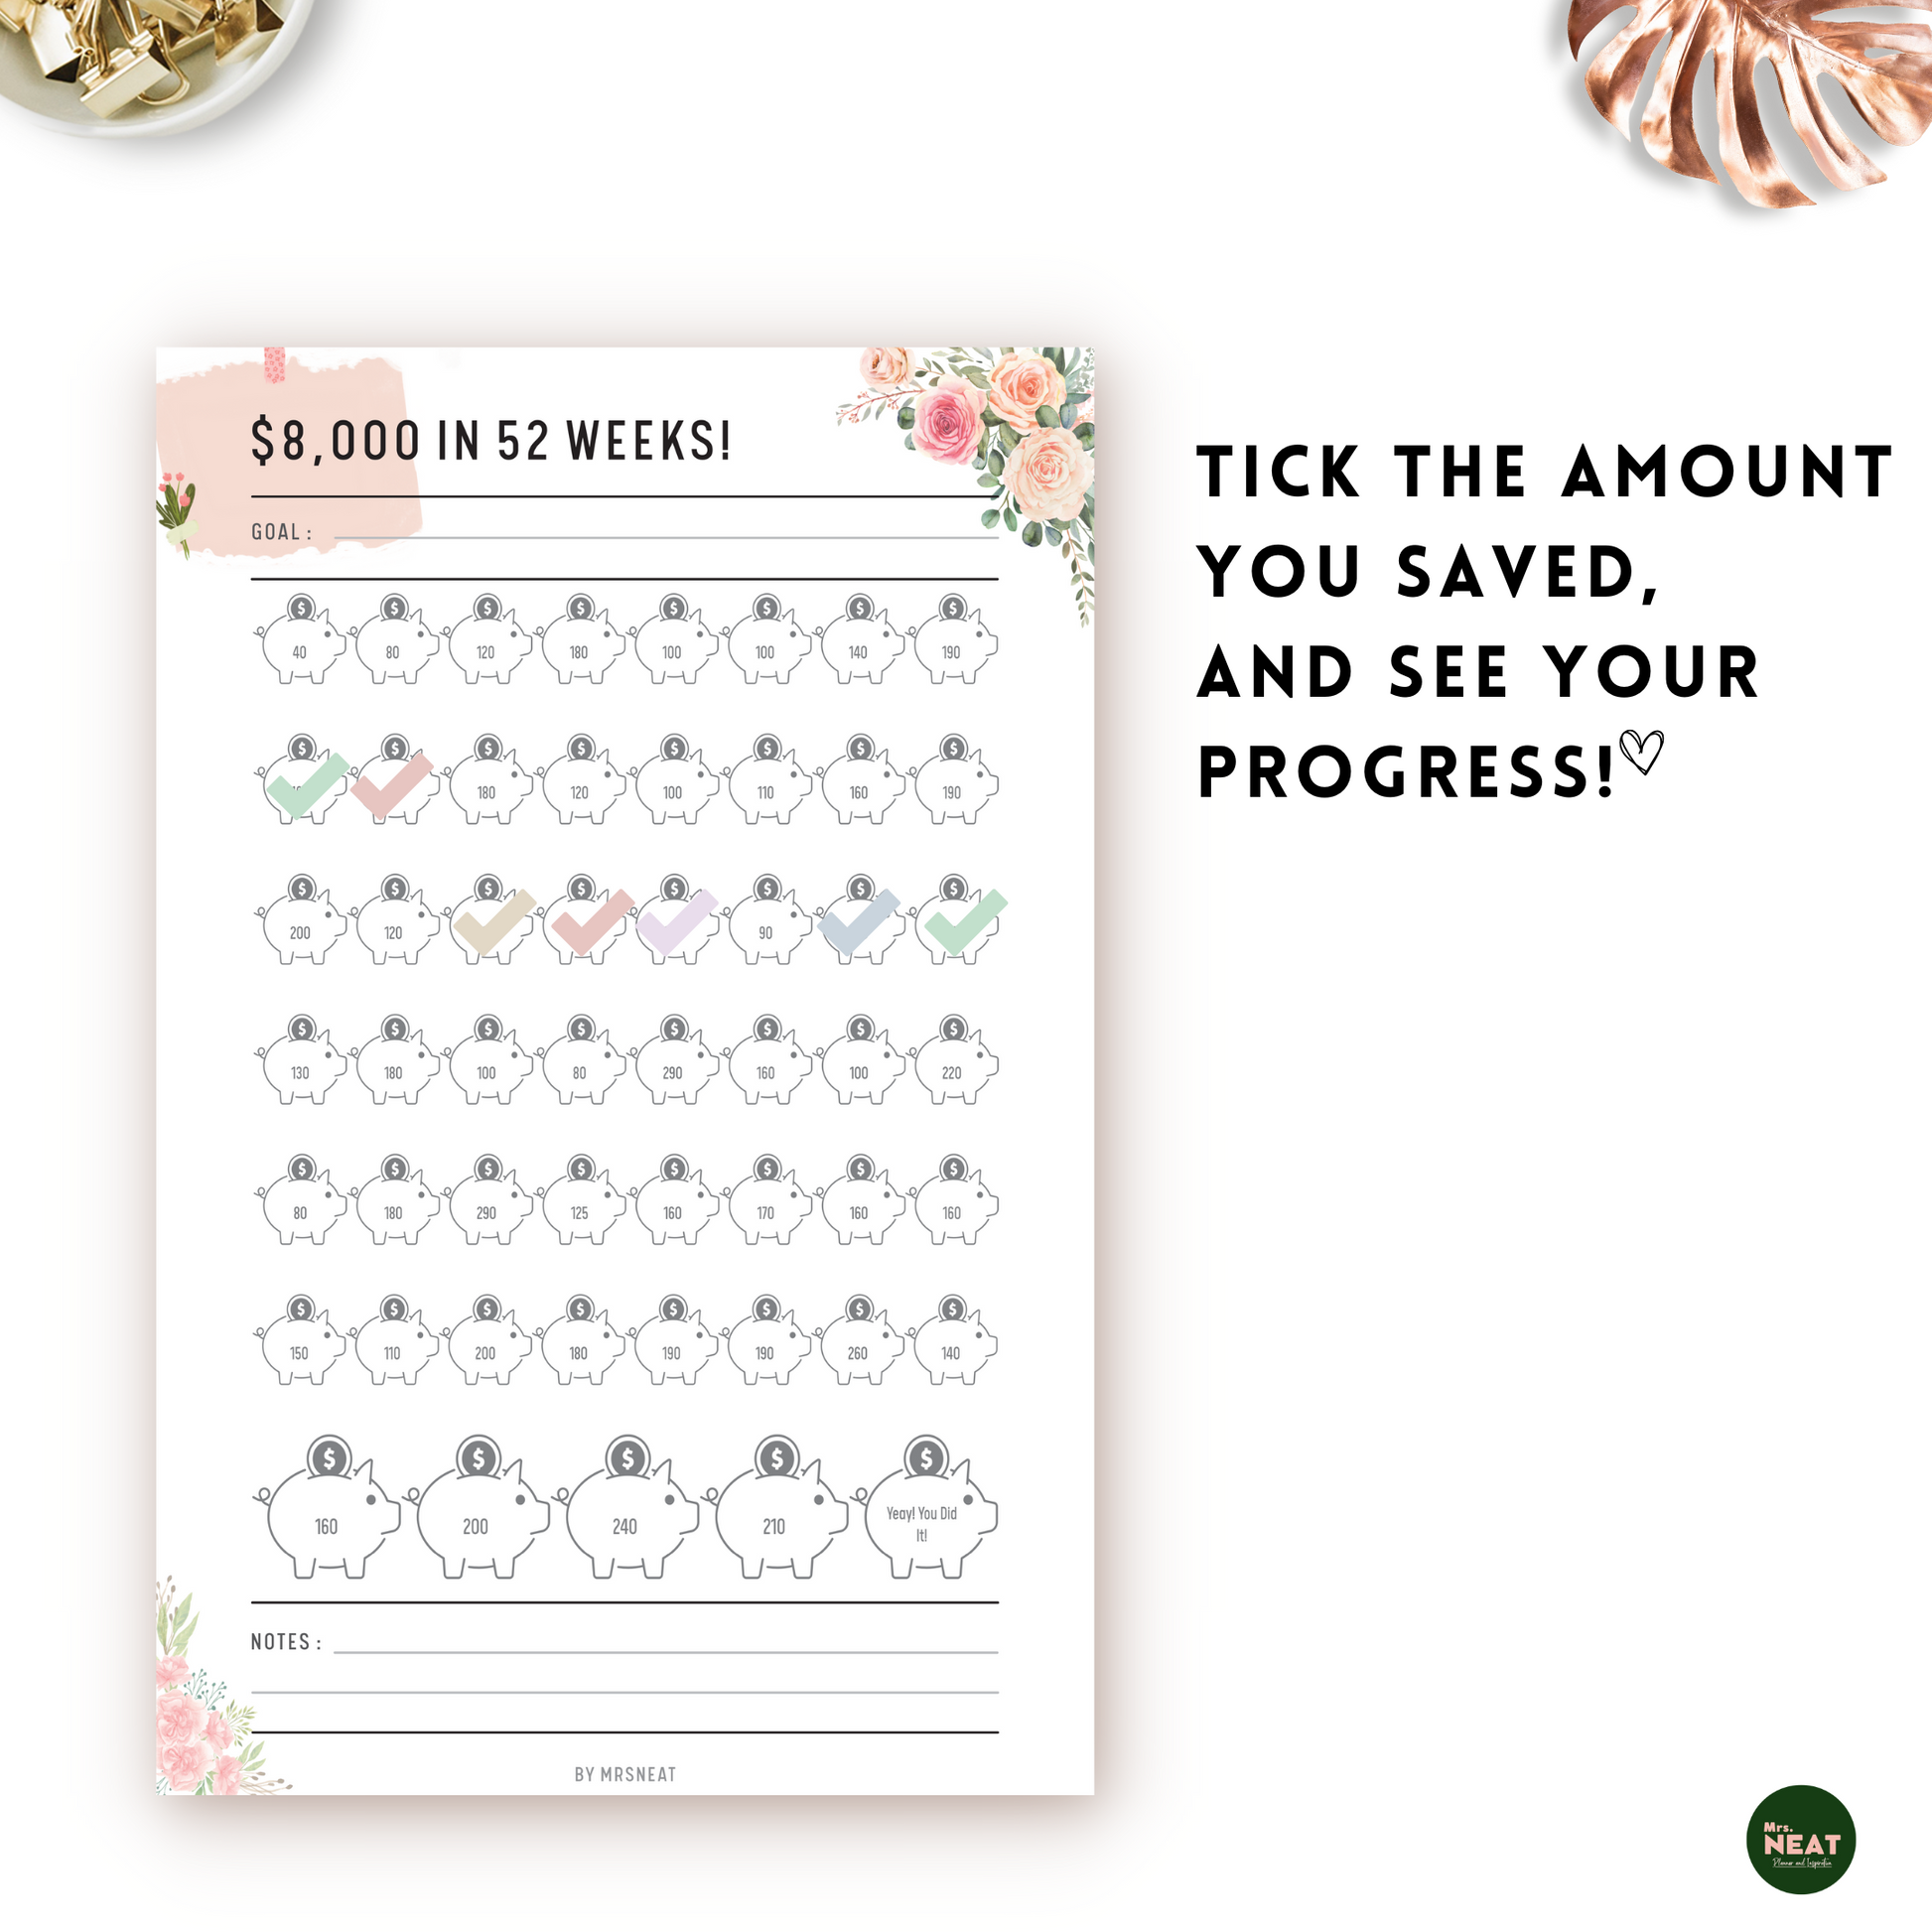 7 Colorful Piggy Bank on Floral Money Saving Challenge Planner to save $8000 in 52 weeks